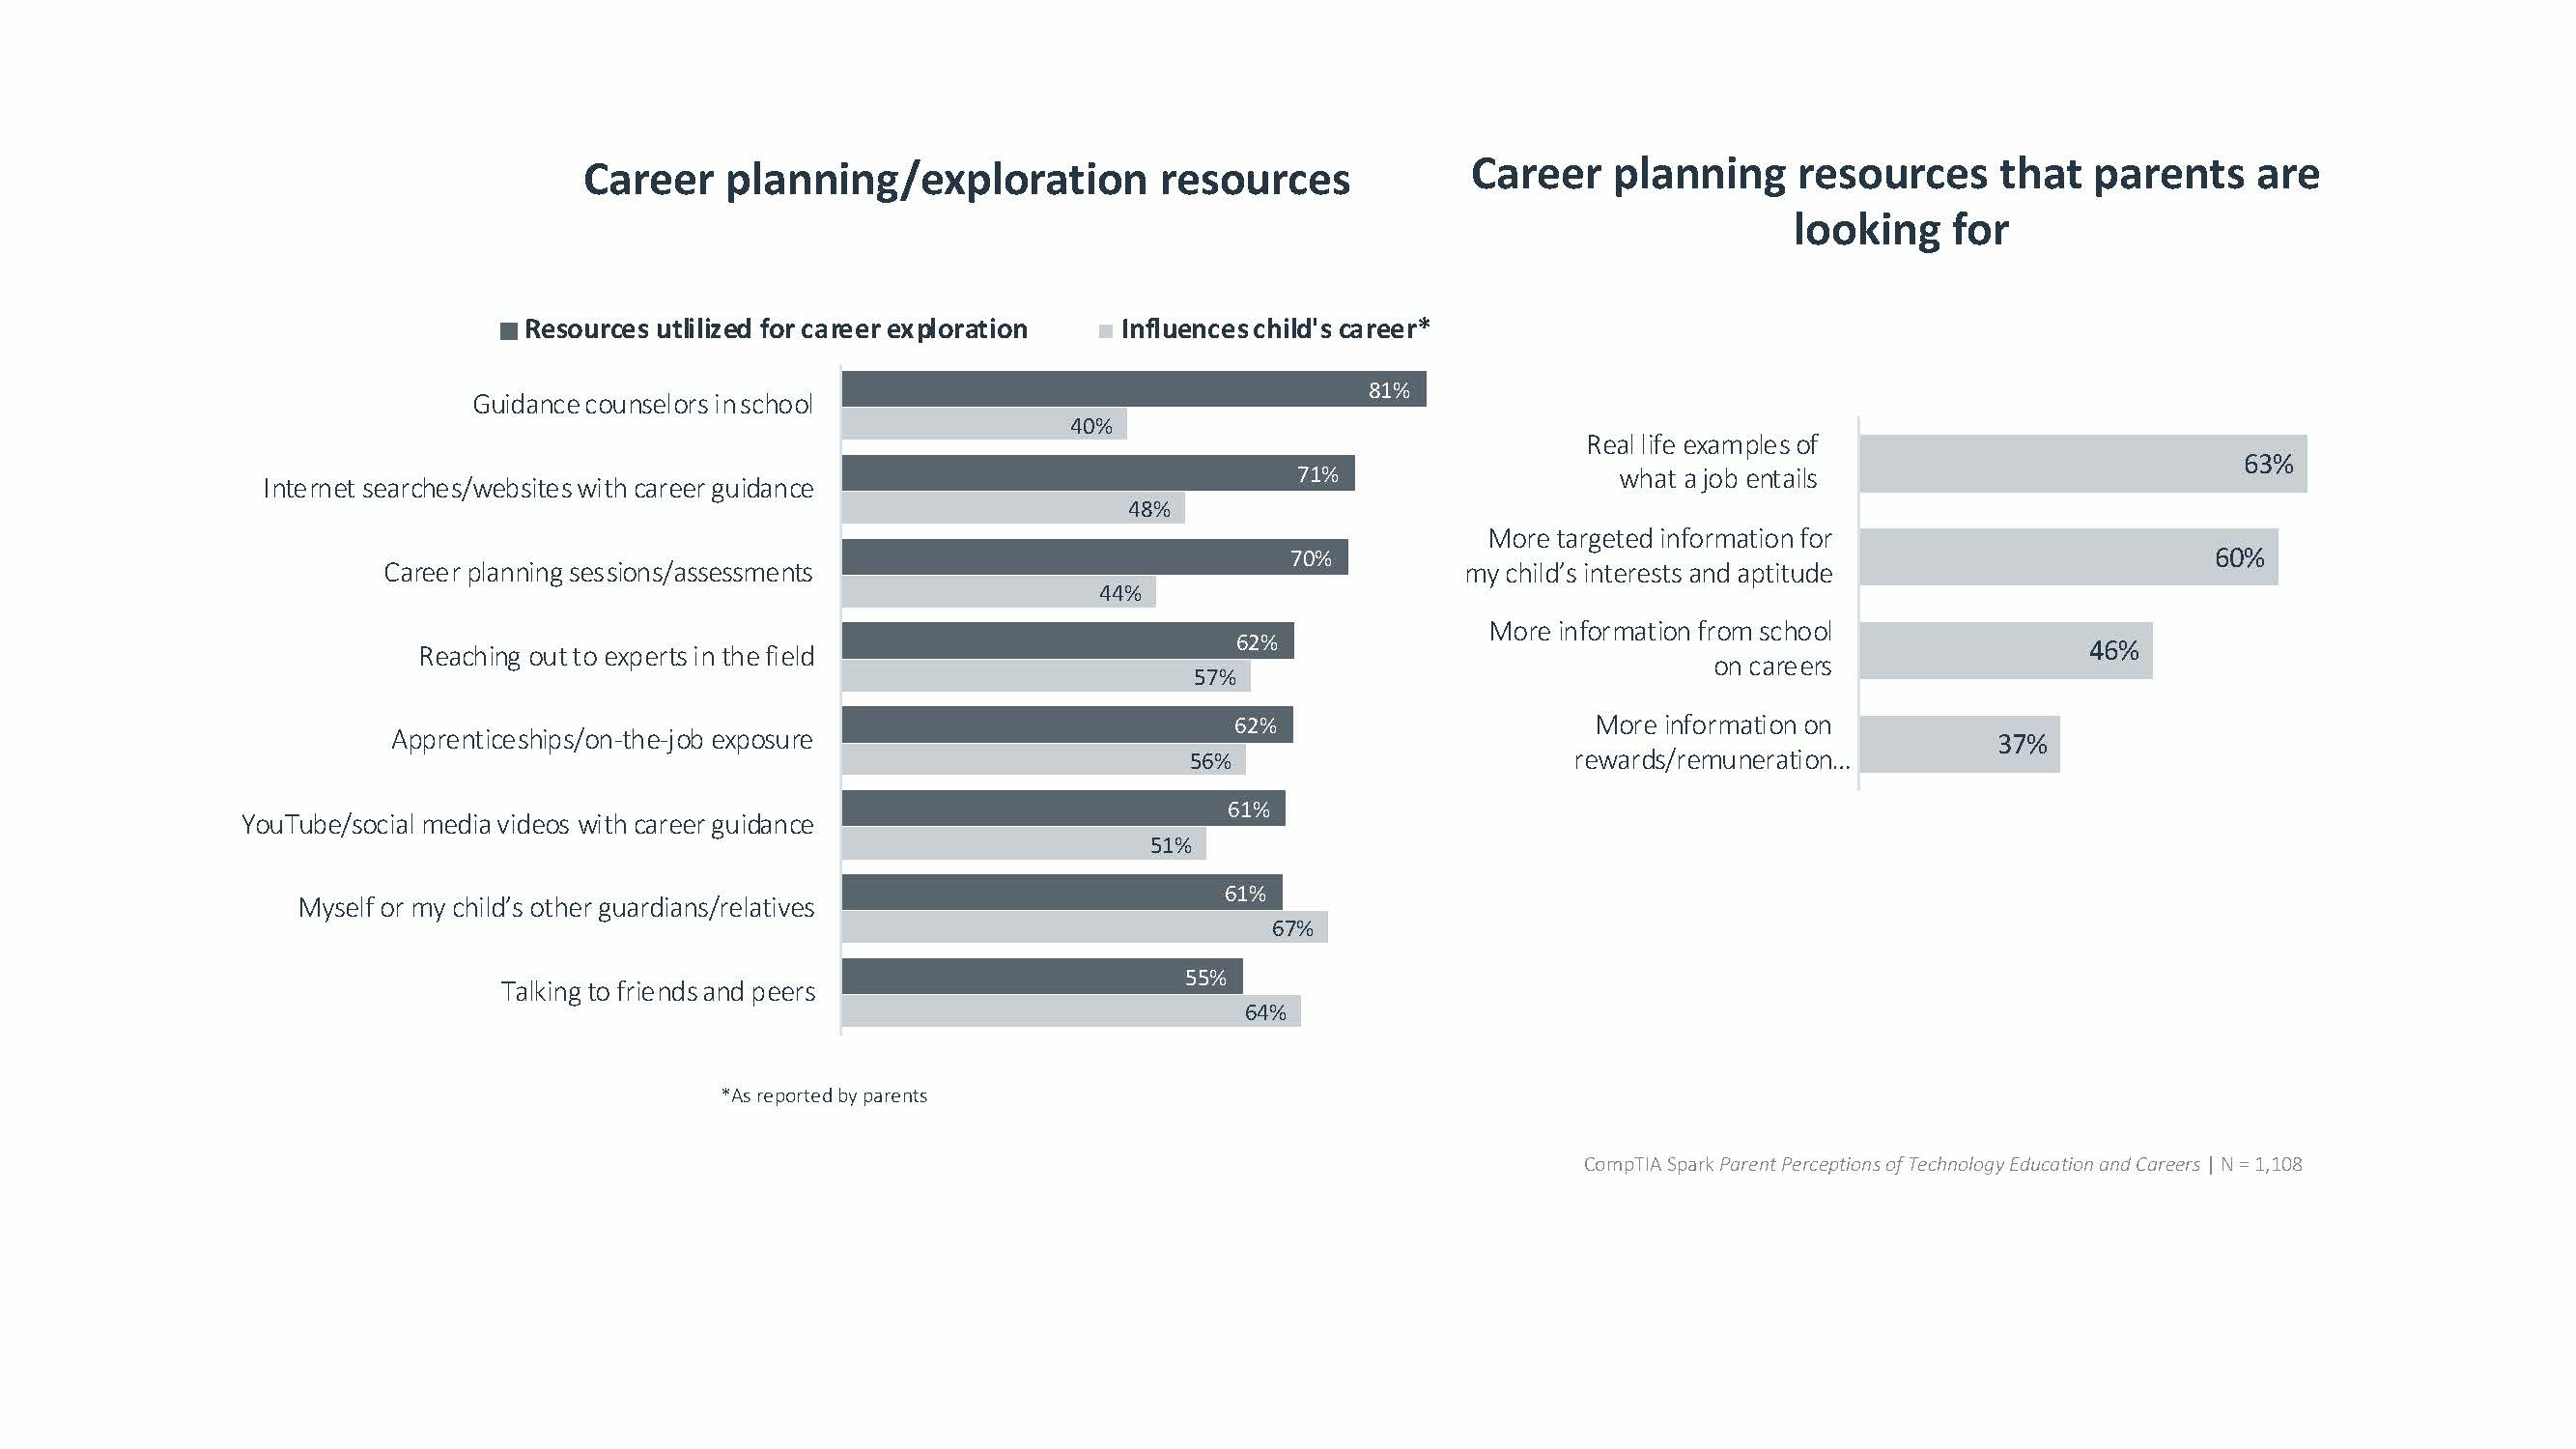 The main influencers for career choice seems to be immediate circle of friends and family. Many parents are looking for more career planning resources, and are particularly interested in more real-life examples of what the job entails.